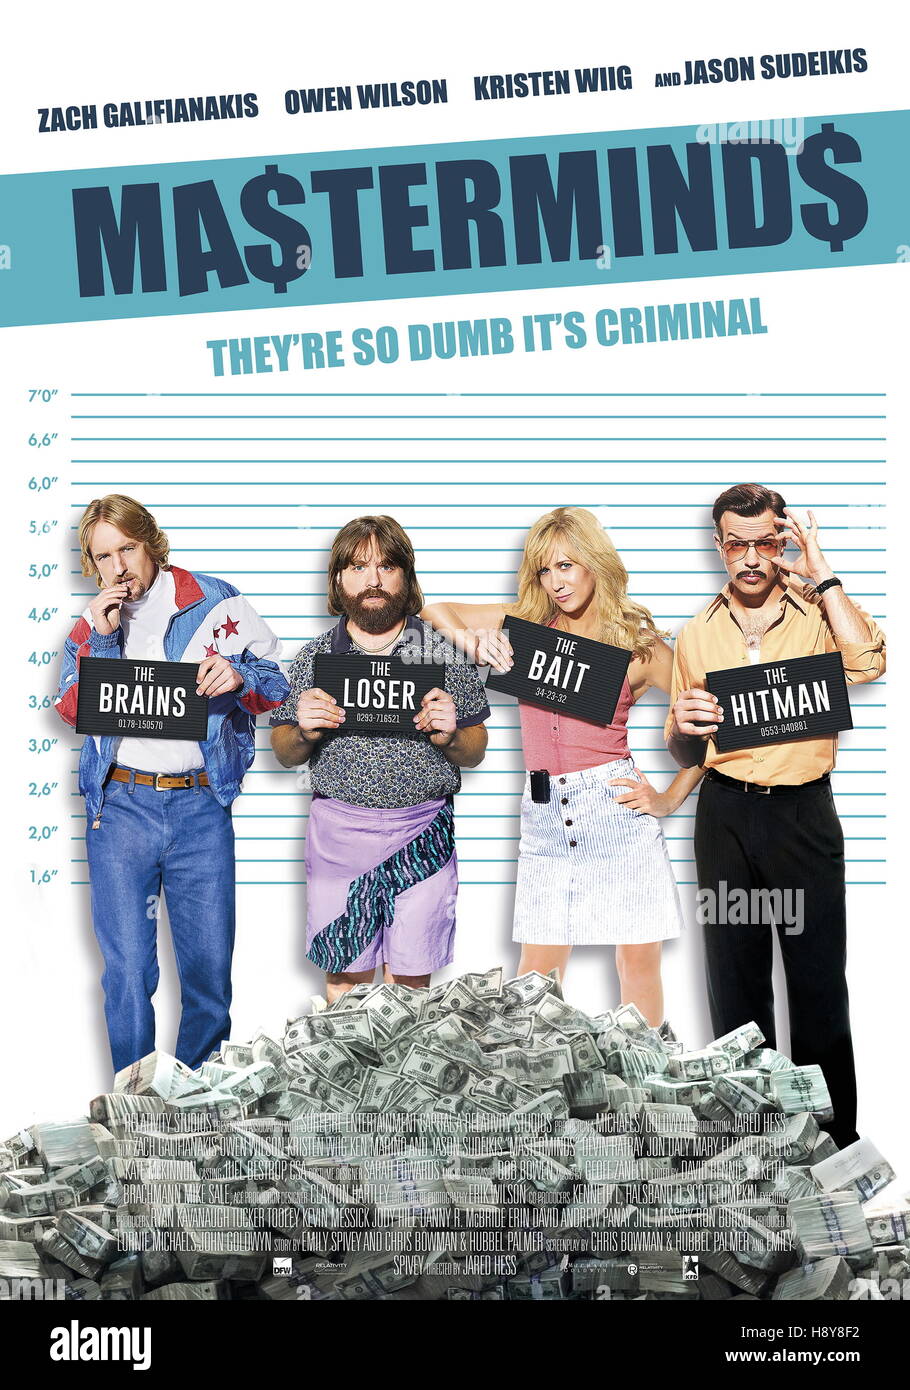 RELEASE DATE: September 30, 2016 TITLE: Masterminds STUDIO: Relativity Media DIRECTOR: Jared Hess PLOT: A guard at an armored car company in the Southern U.S. organizes one of the biggest bank heists in American history. Based on the October 1997 Loomis Fargo robbery STARRING: Kristen Wiig, Zach Galifianakis (Credit: c Relativity Media/Entertainment Pictures/) Stock Photo